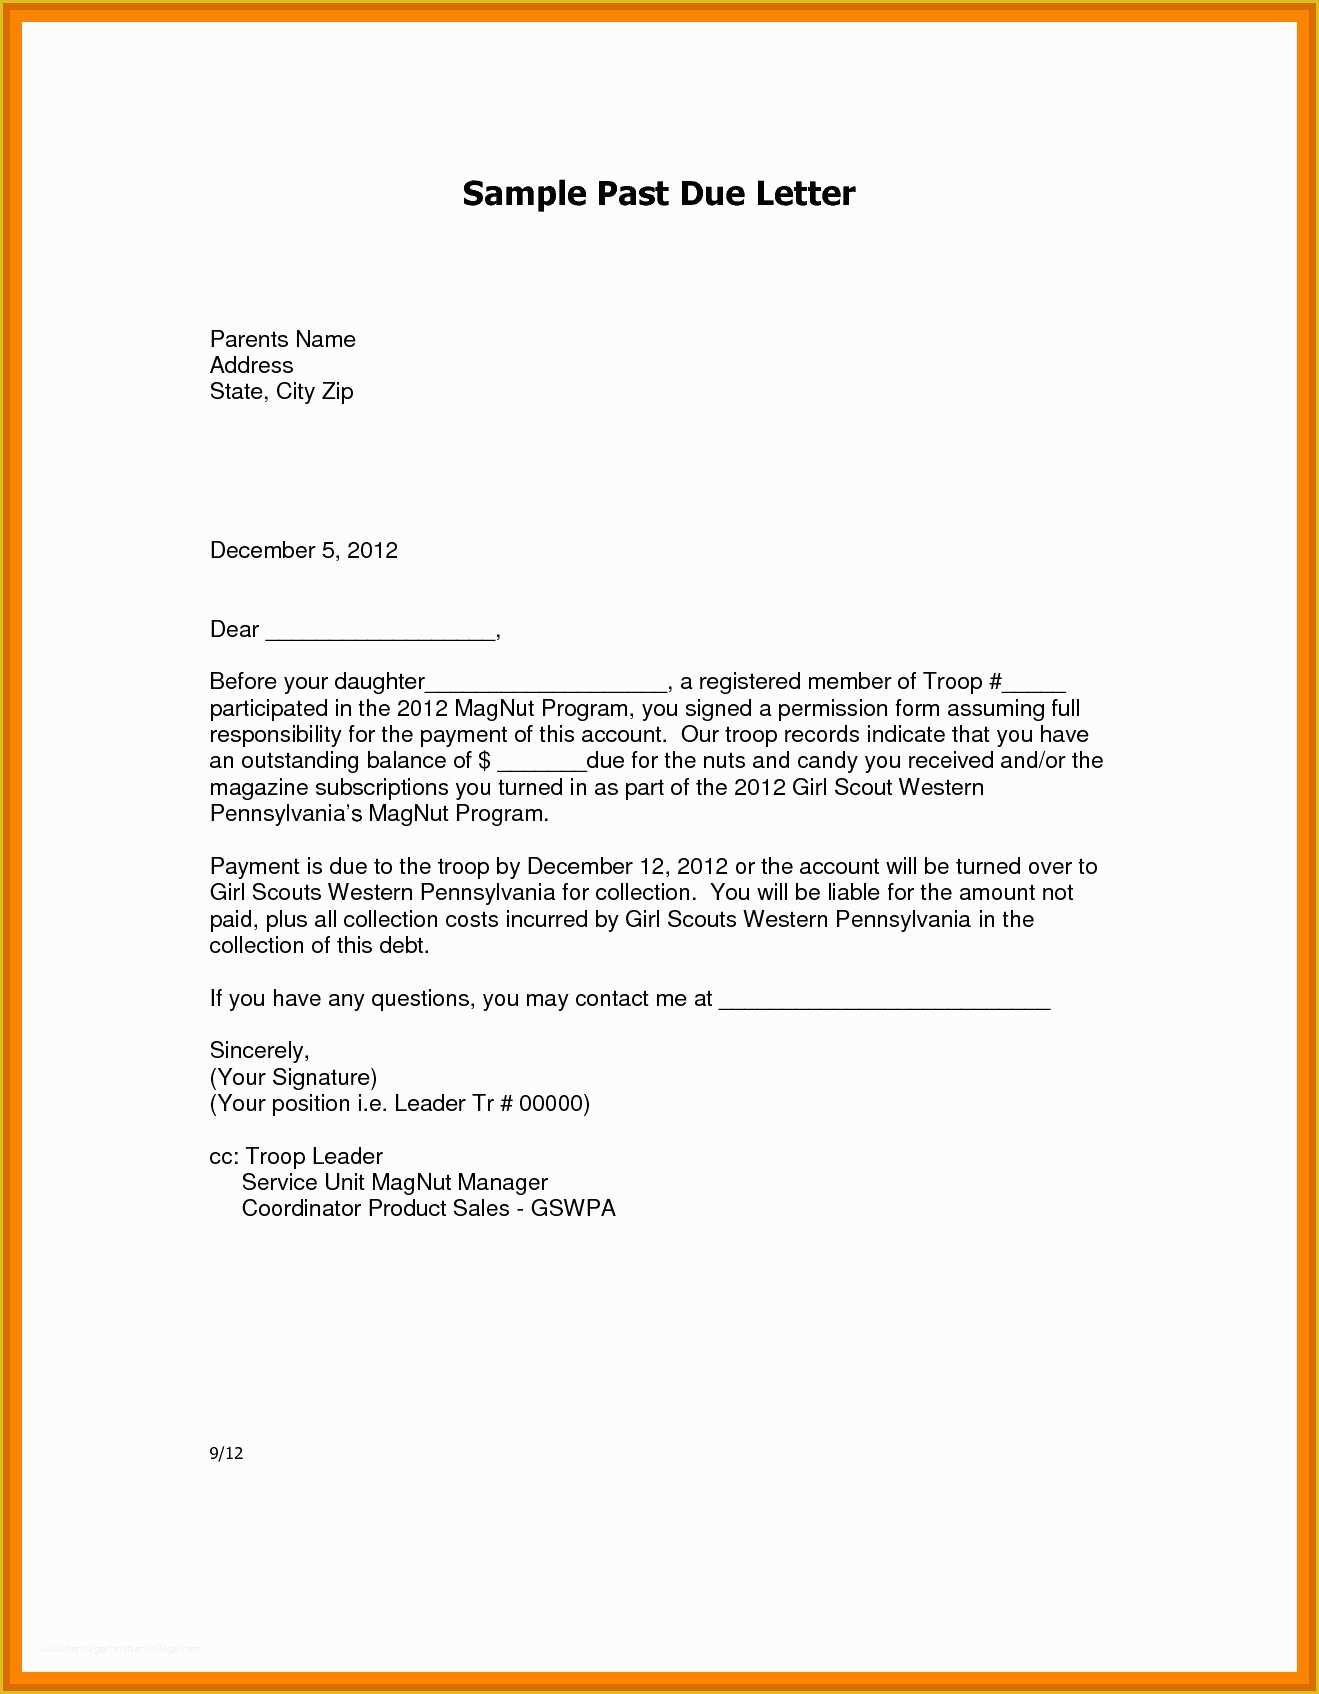 get-our-image-of-past-due-invoice-letter-template-letter-templates-images